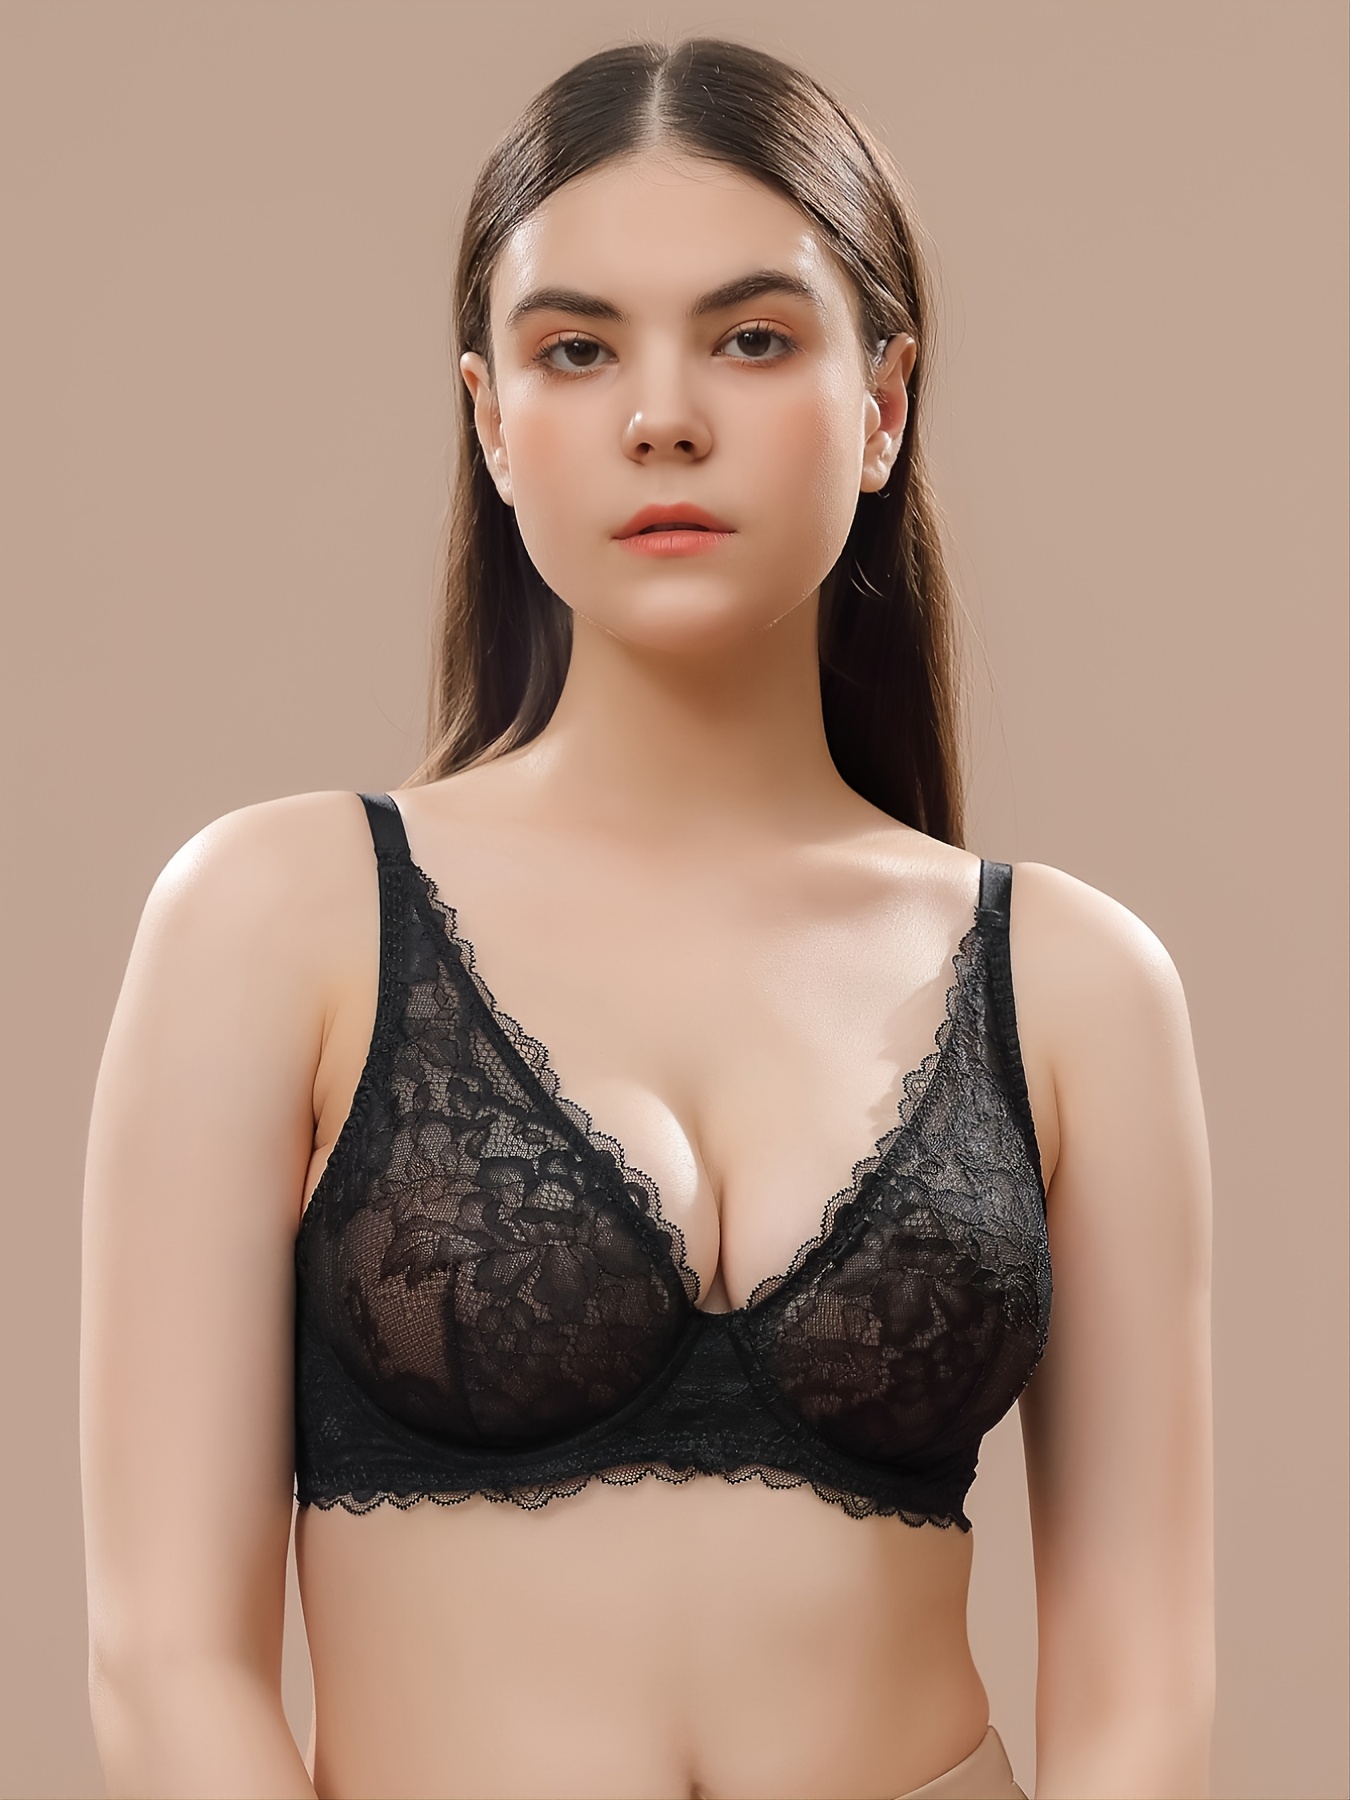 Buy Meizimei lace Sheer Bra XXX Fashion underwaer bh Push up Bras Big Size  Ladies Brassiere Ultra Boost Black Bralette Skin Cup Size D Bands Size 110  48 at